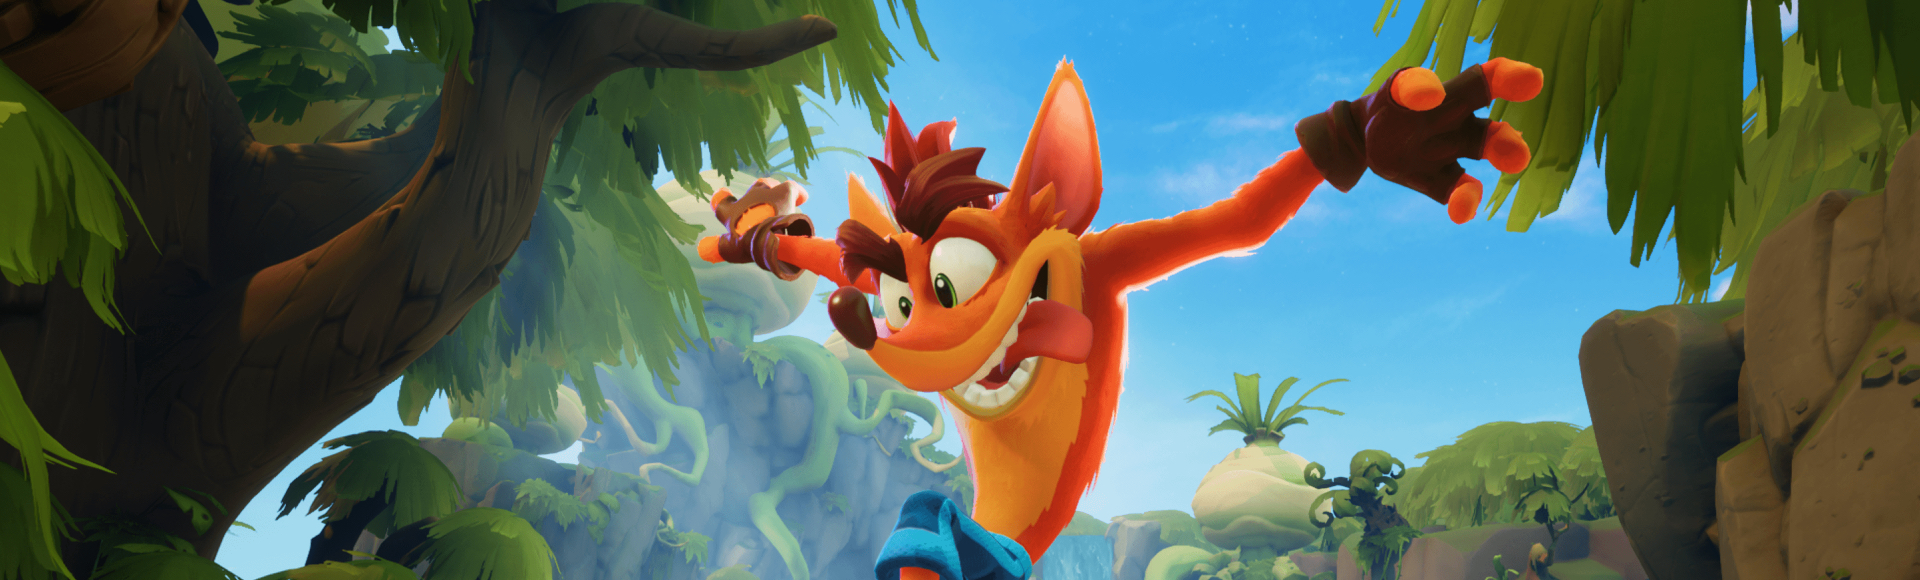 crash time 4 pc game system requirements